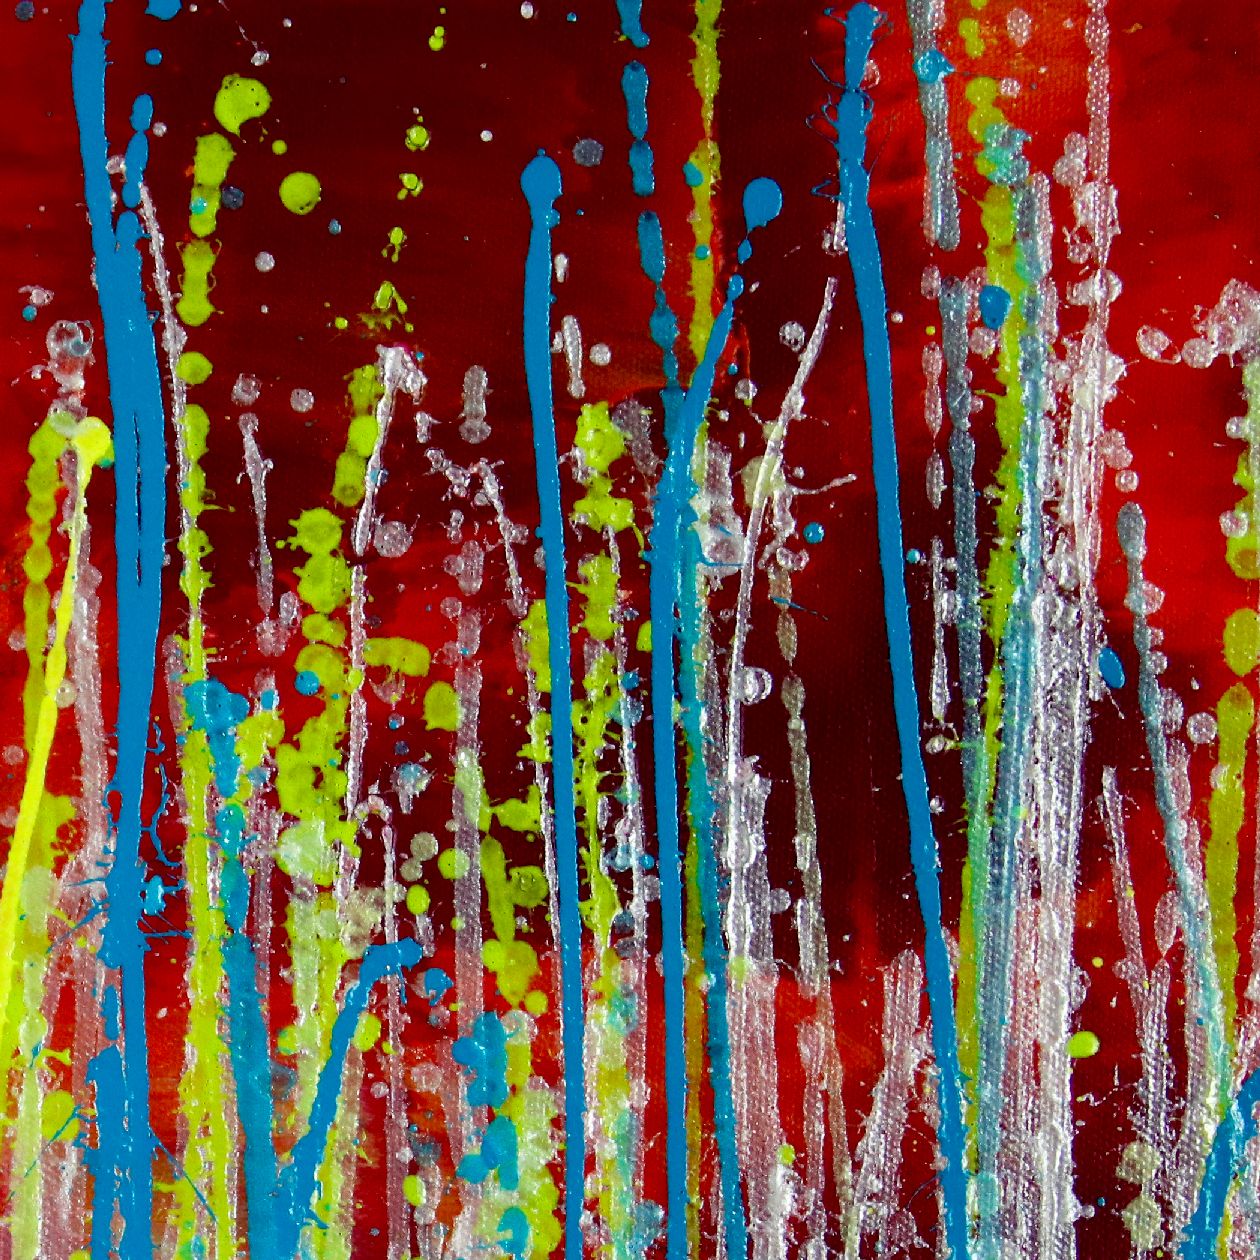 SOLD - Detail - Daring natural synergy | Energetic abstract painting by Nestor Toro (2020)